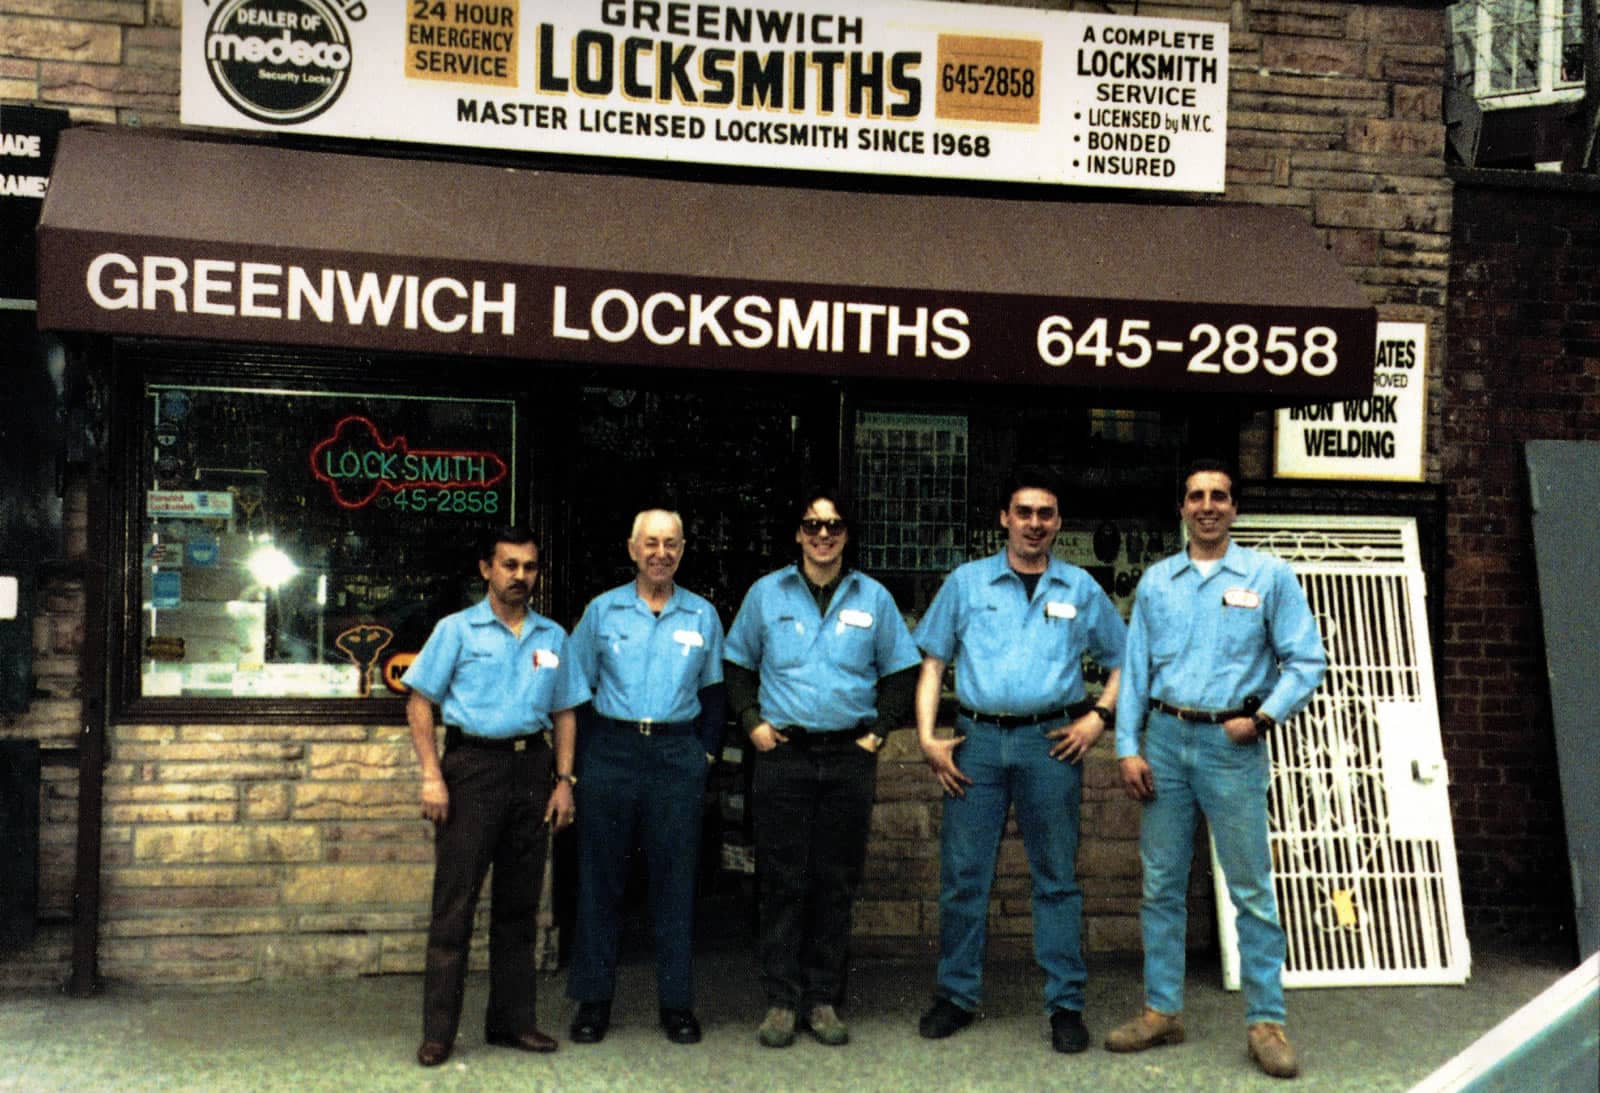 Greenwich Locksmiths has been providing commercial and residential locksmith services to NYC for over 40 years